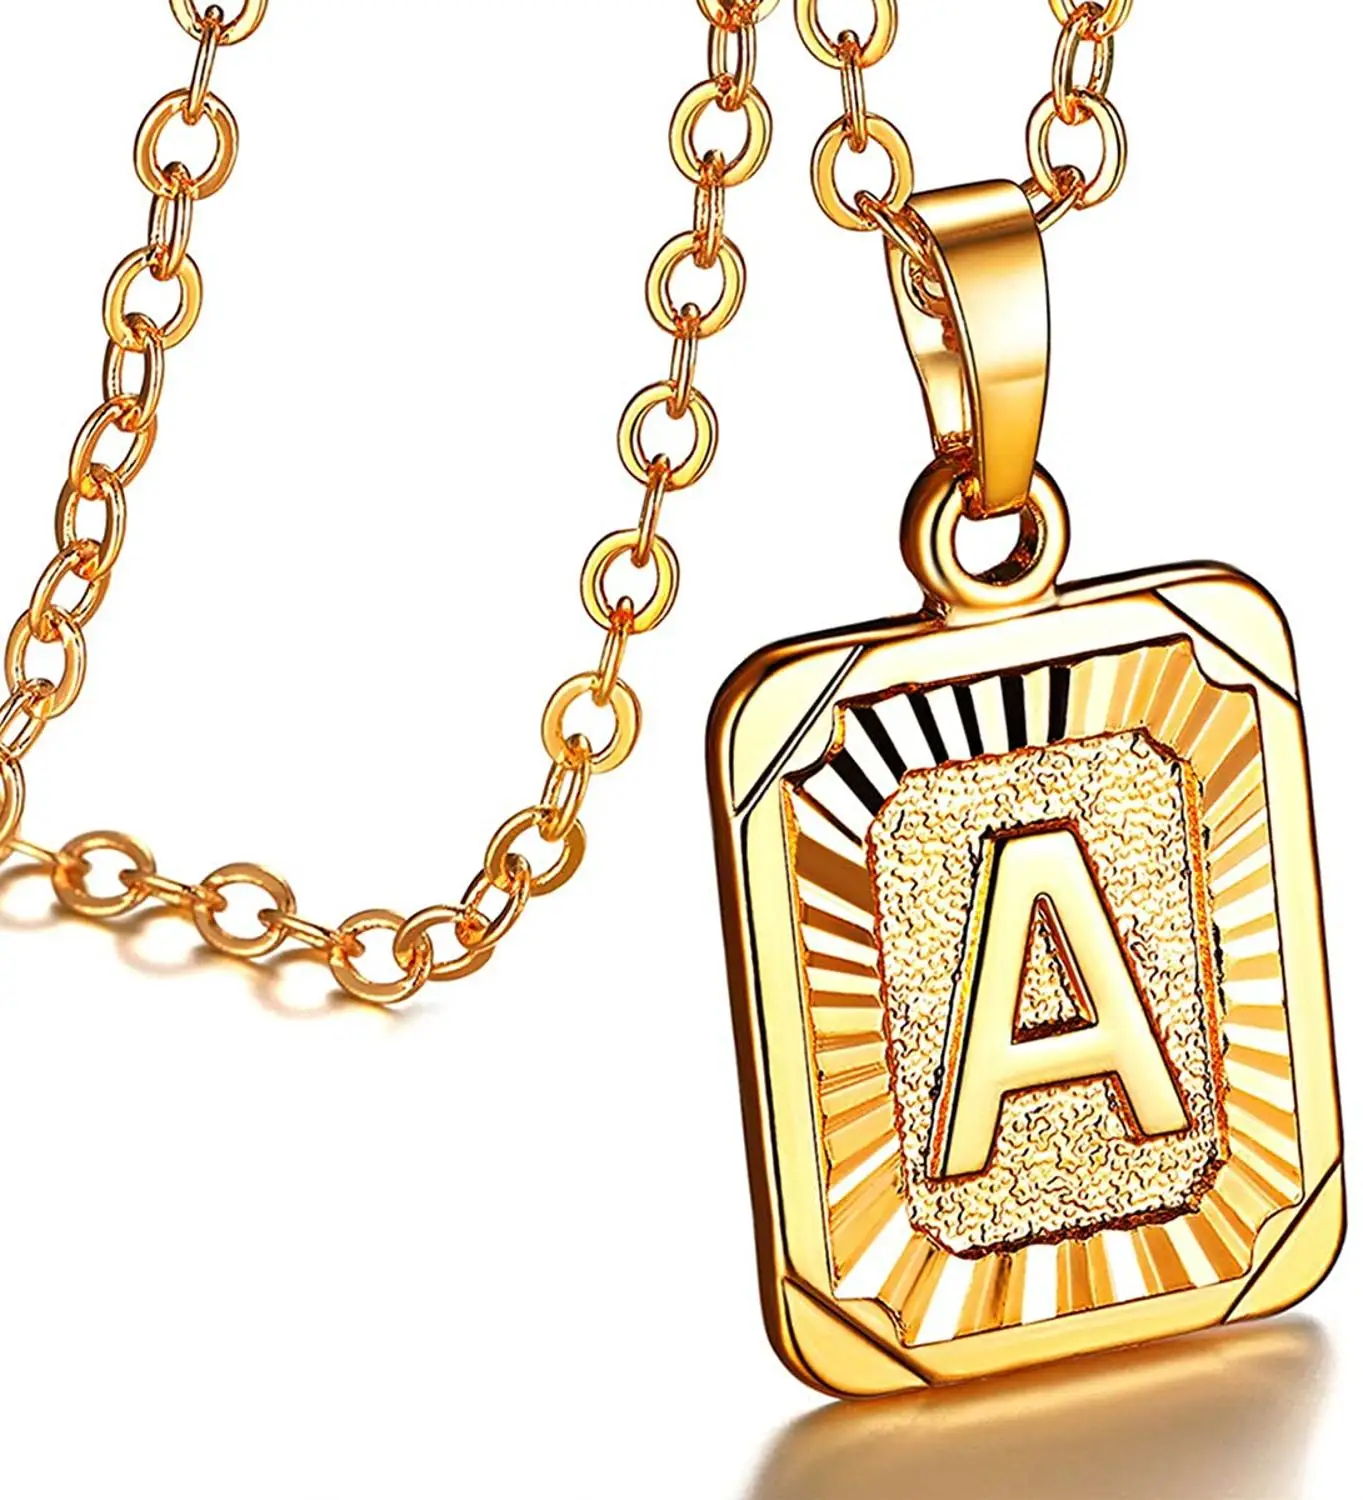 

U7 26 A-Z English Capital Tiny Small Charm Pendant Gold/Platinum Letter Initial Monogram Necklace for Women Girls P1196